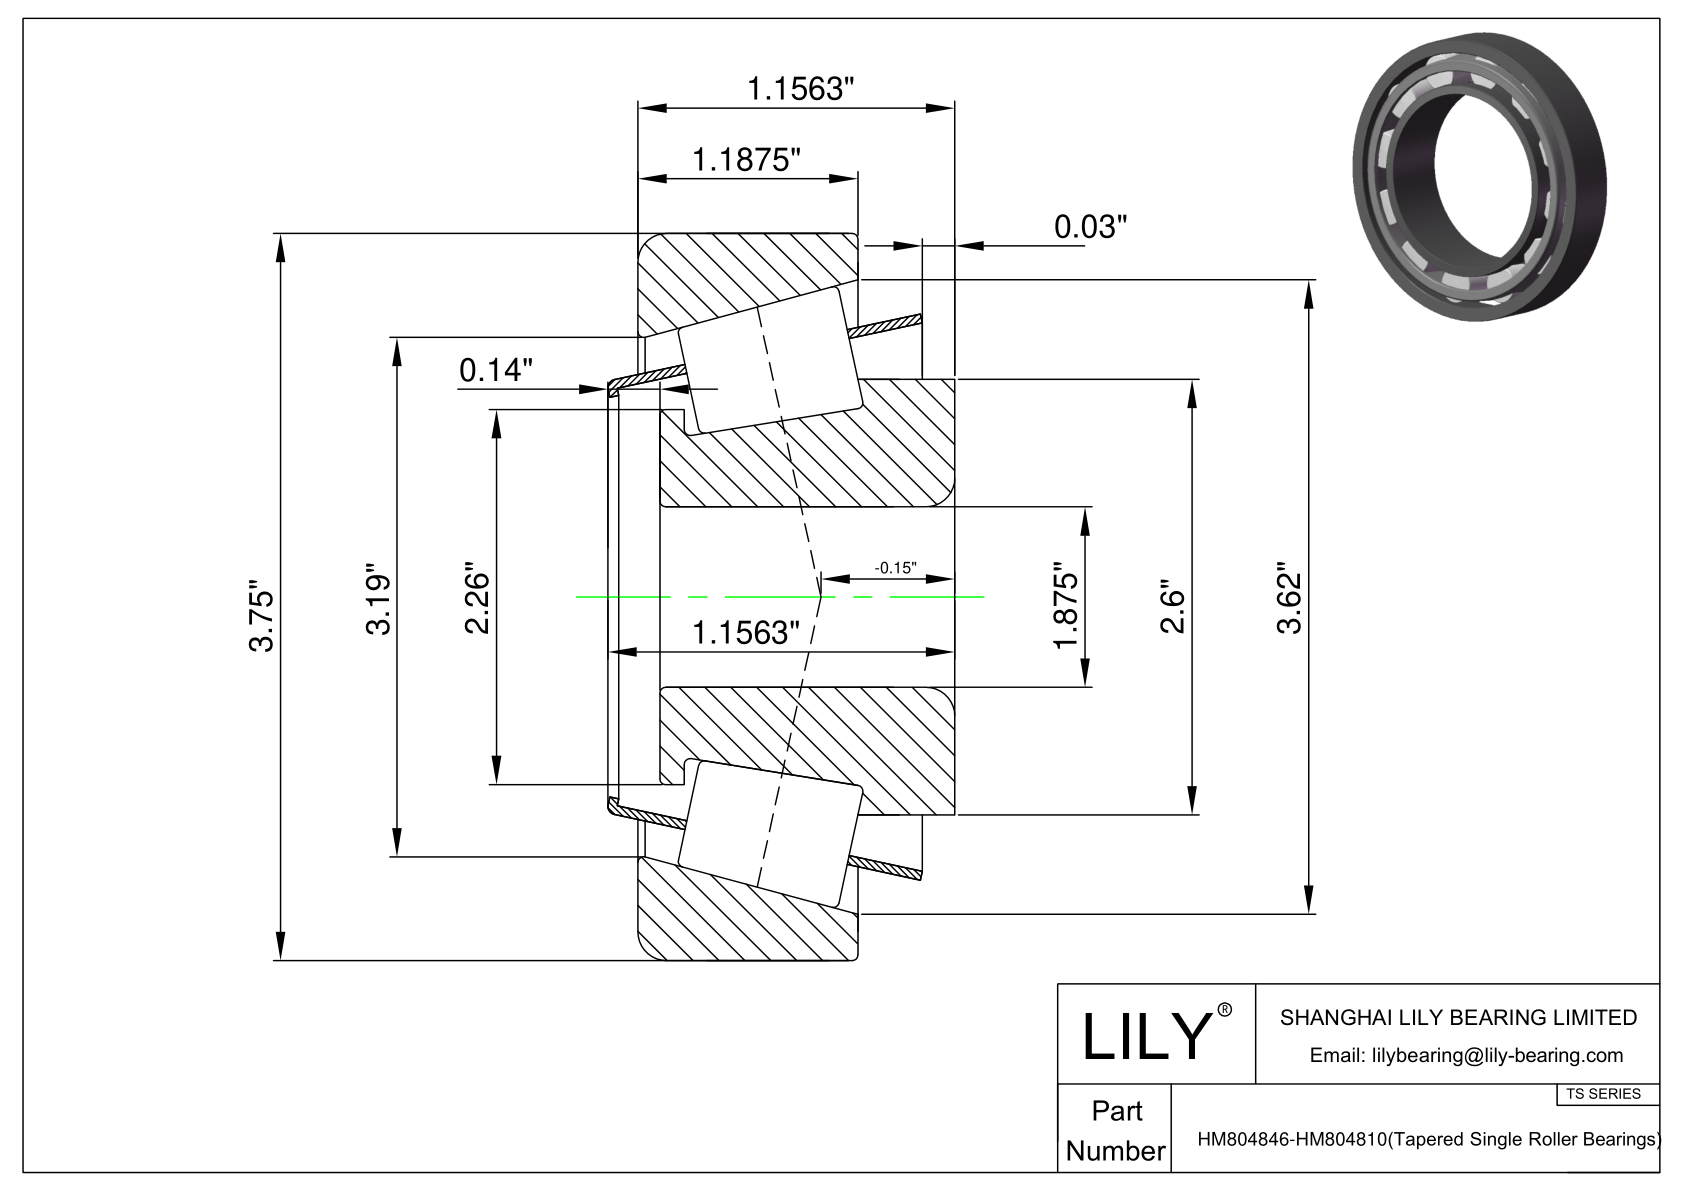 HM804846-HM804810 TS (Tapered Single Roller Bearings) (Imperial) cad drawing